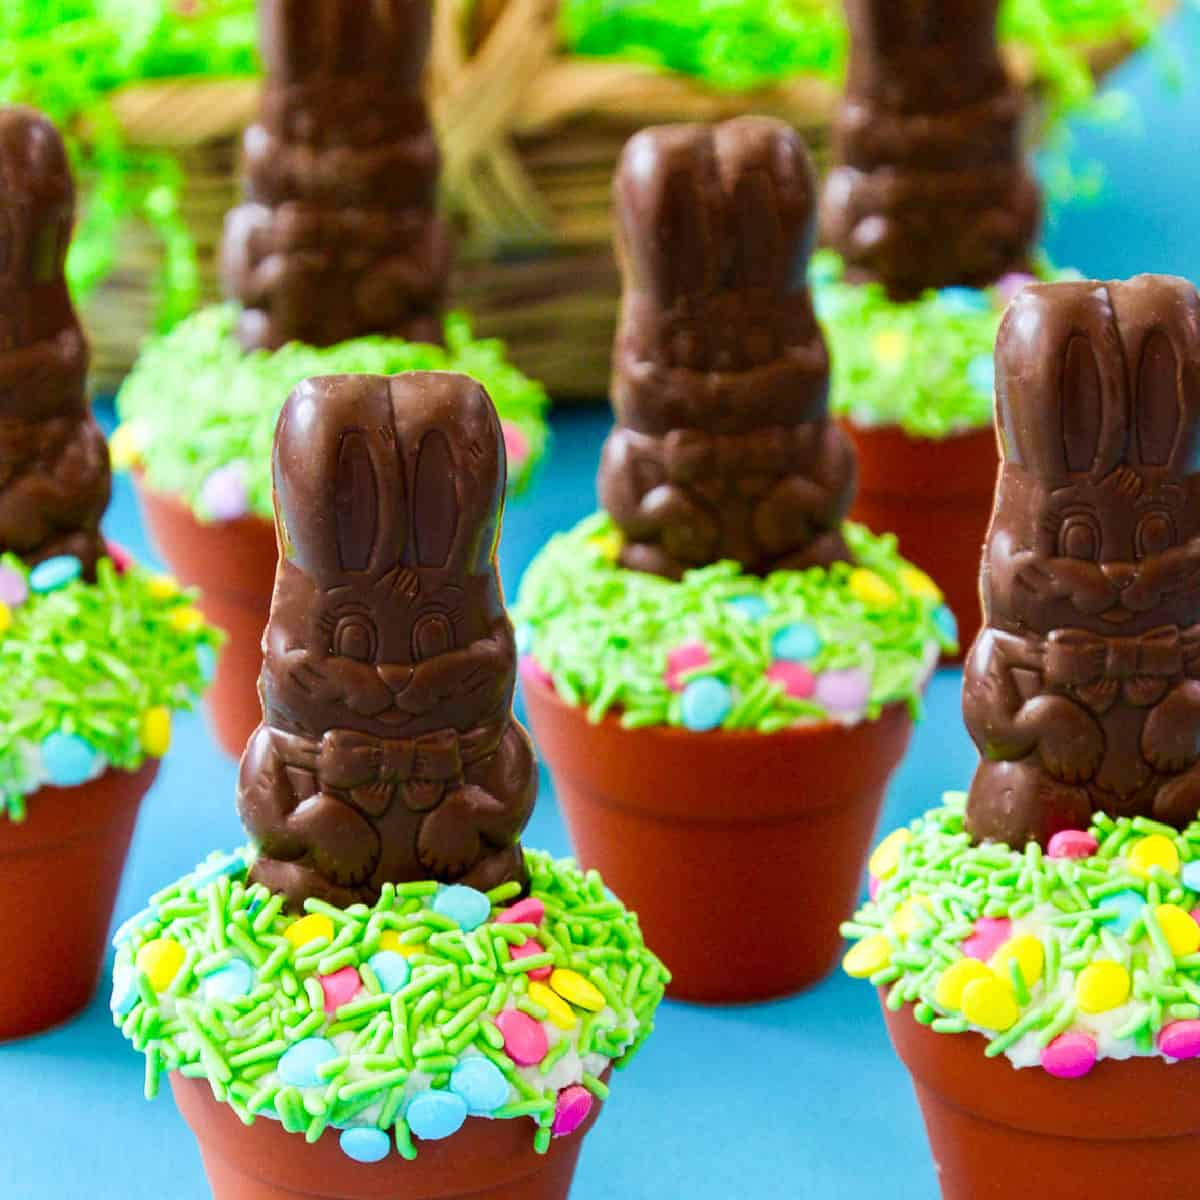 A display of Easter cupcakes decorated with chocolate bunnies and green sprinkles.